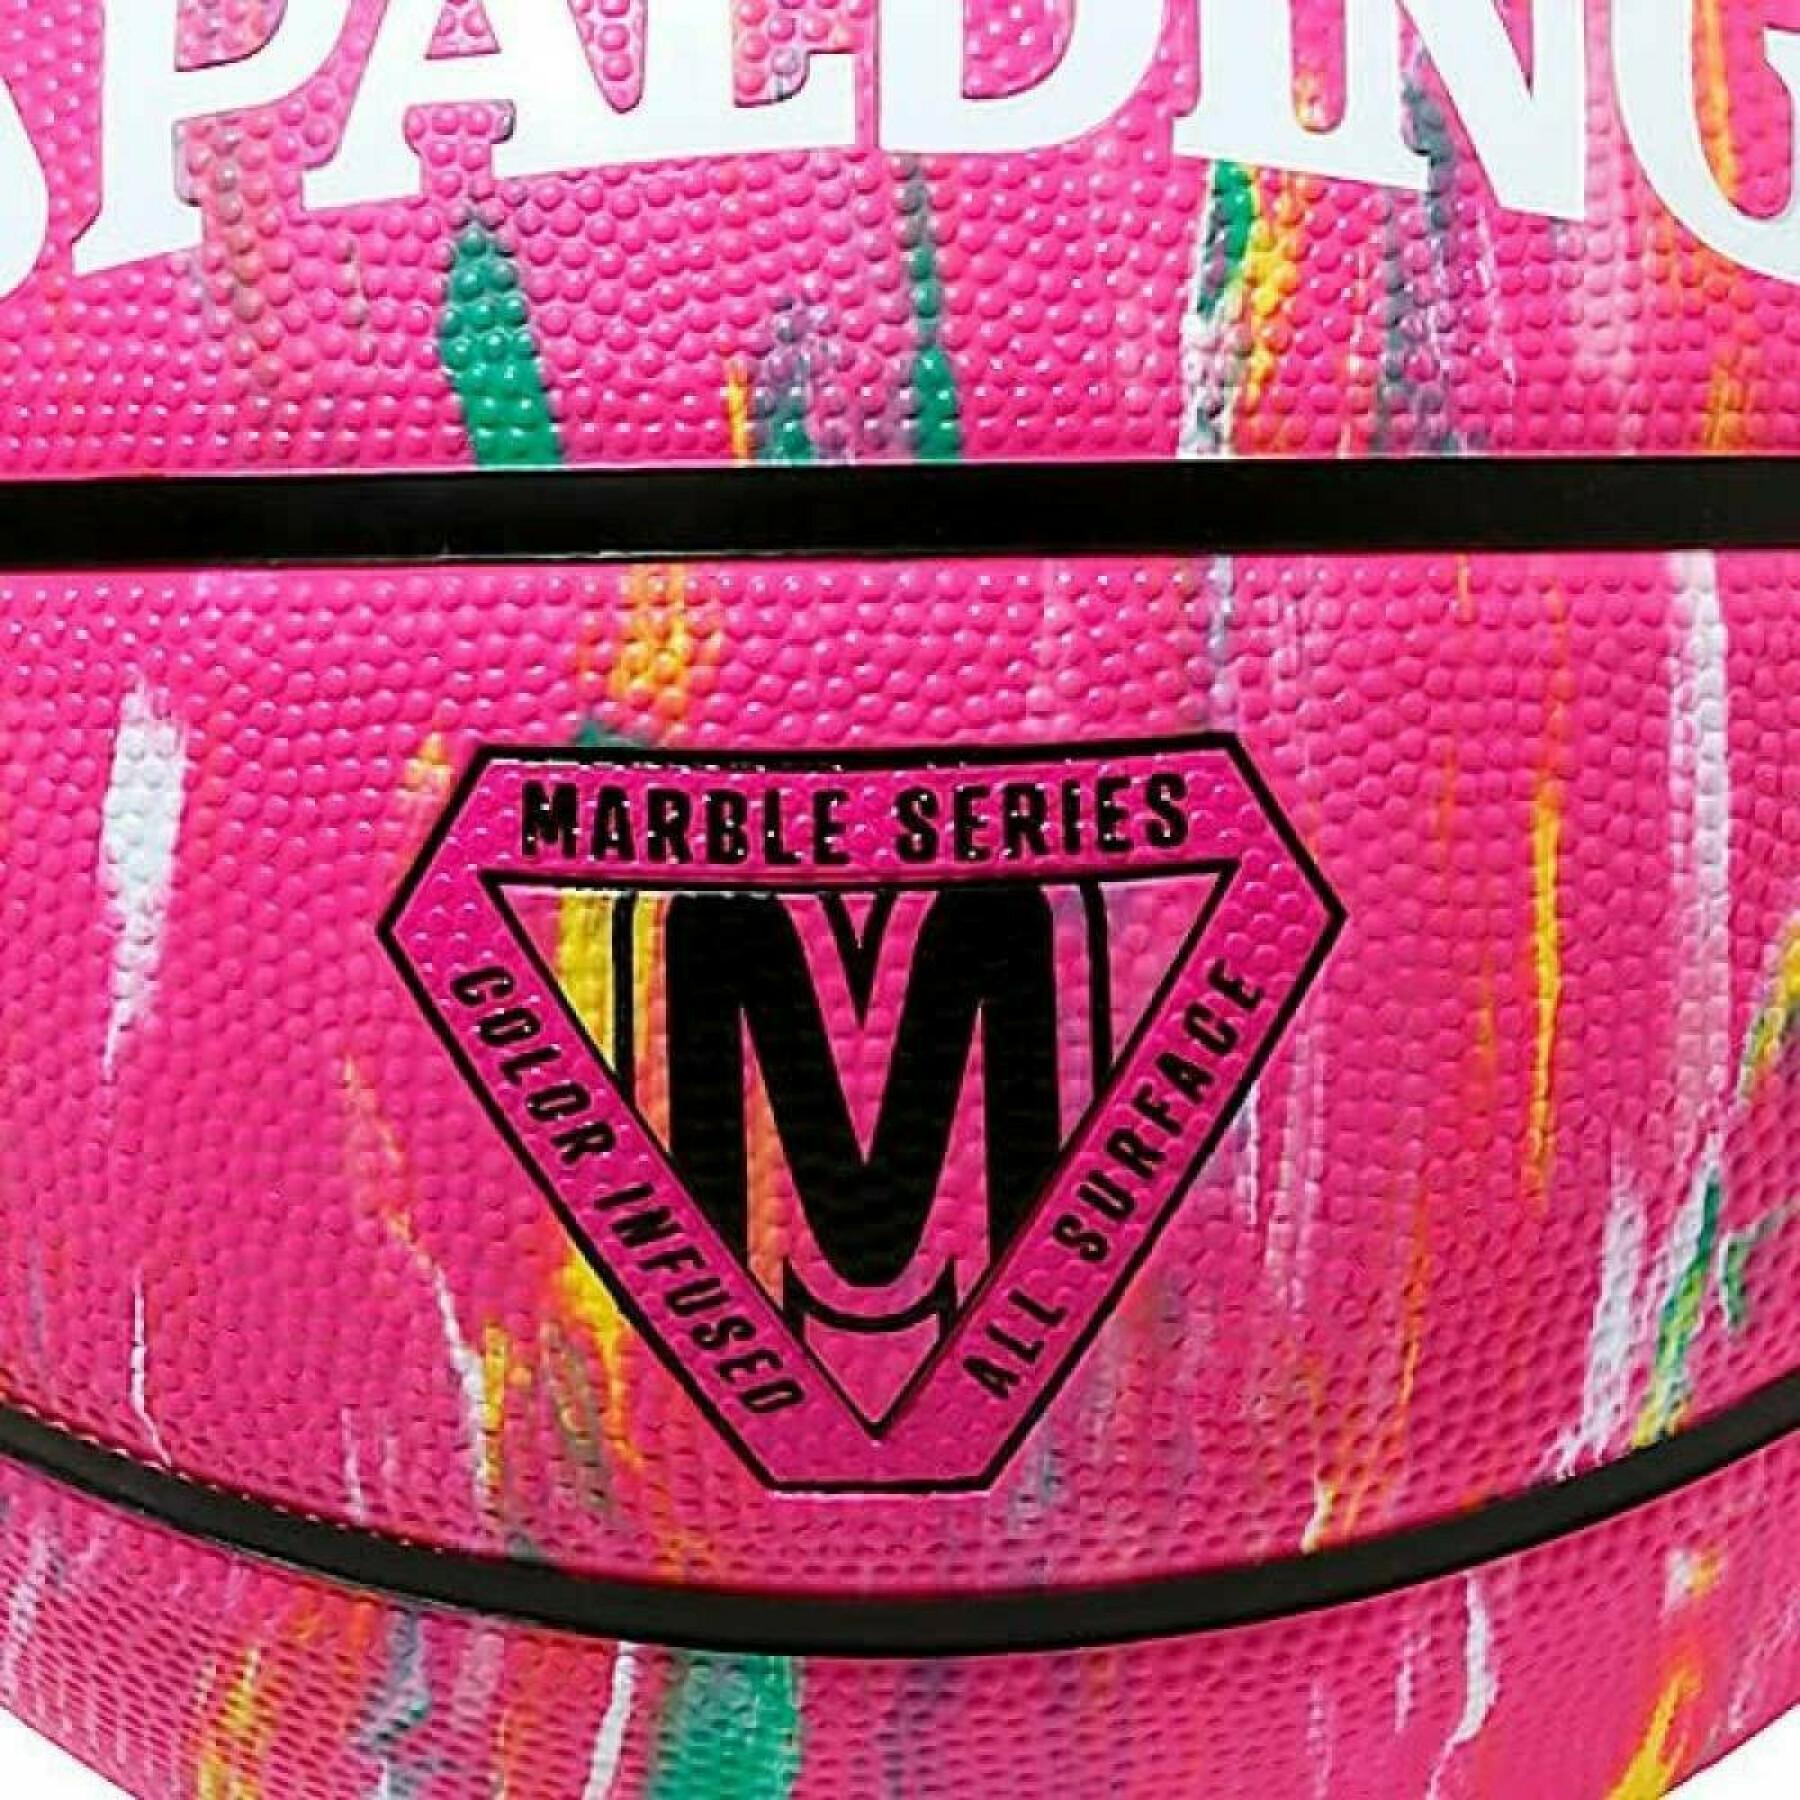 Ball Spalding Marble Series